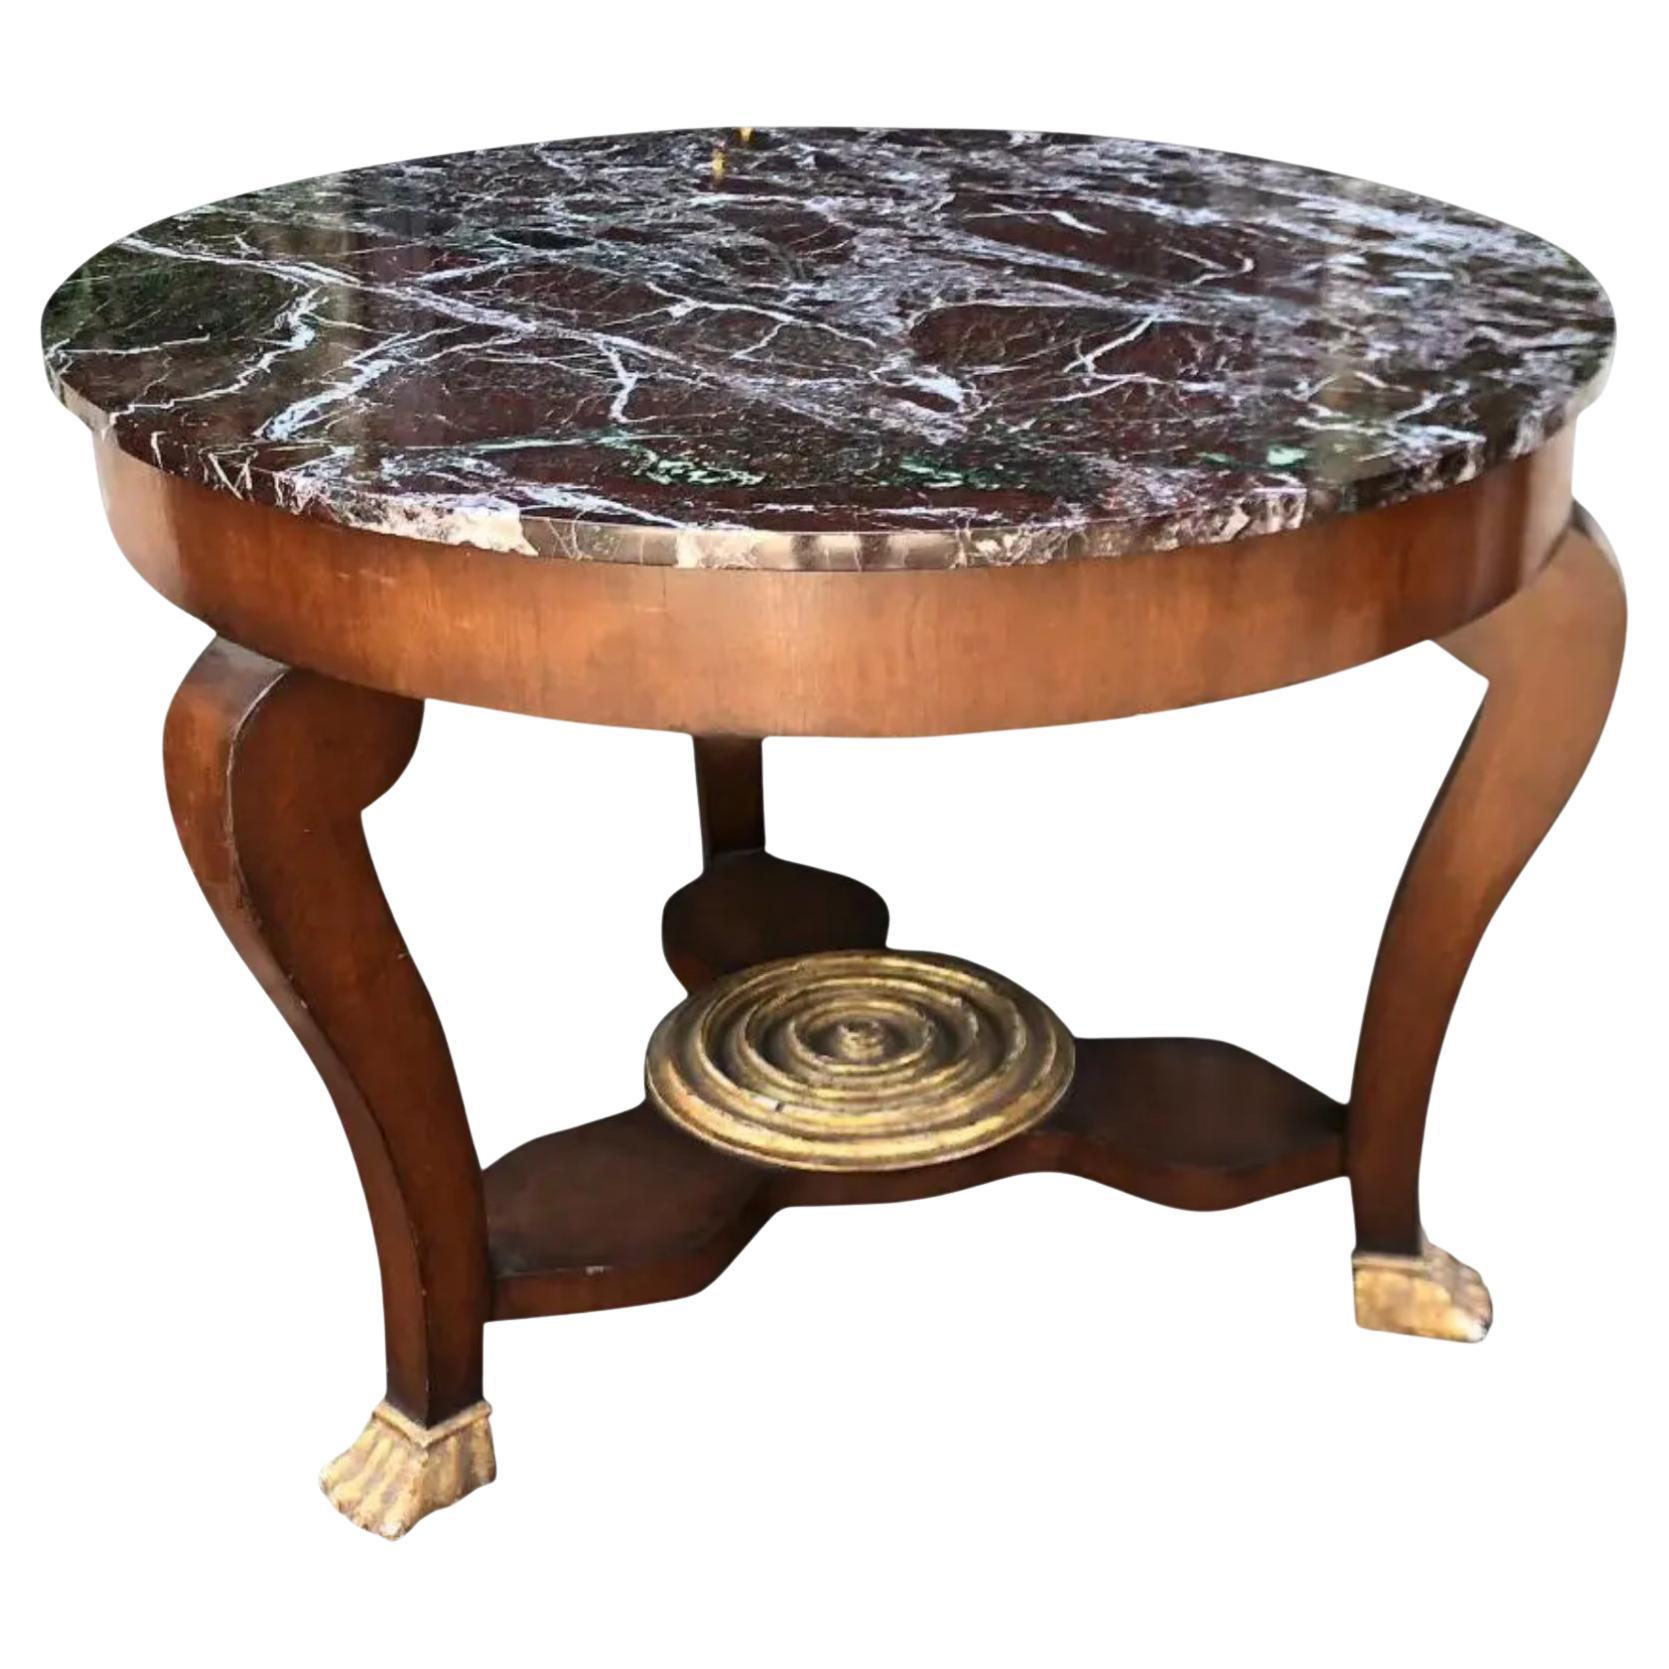 Antique 19th C Empire Mahogany Gilt-Wood Marble Top Table For Sale